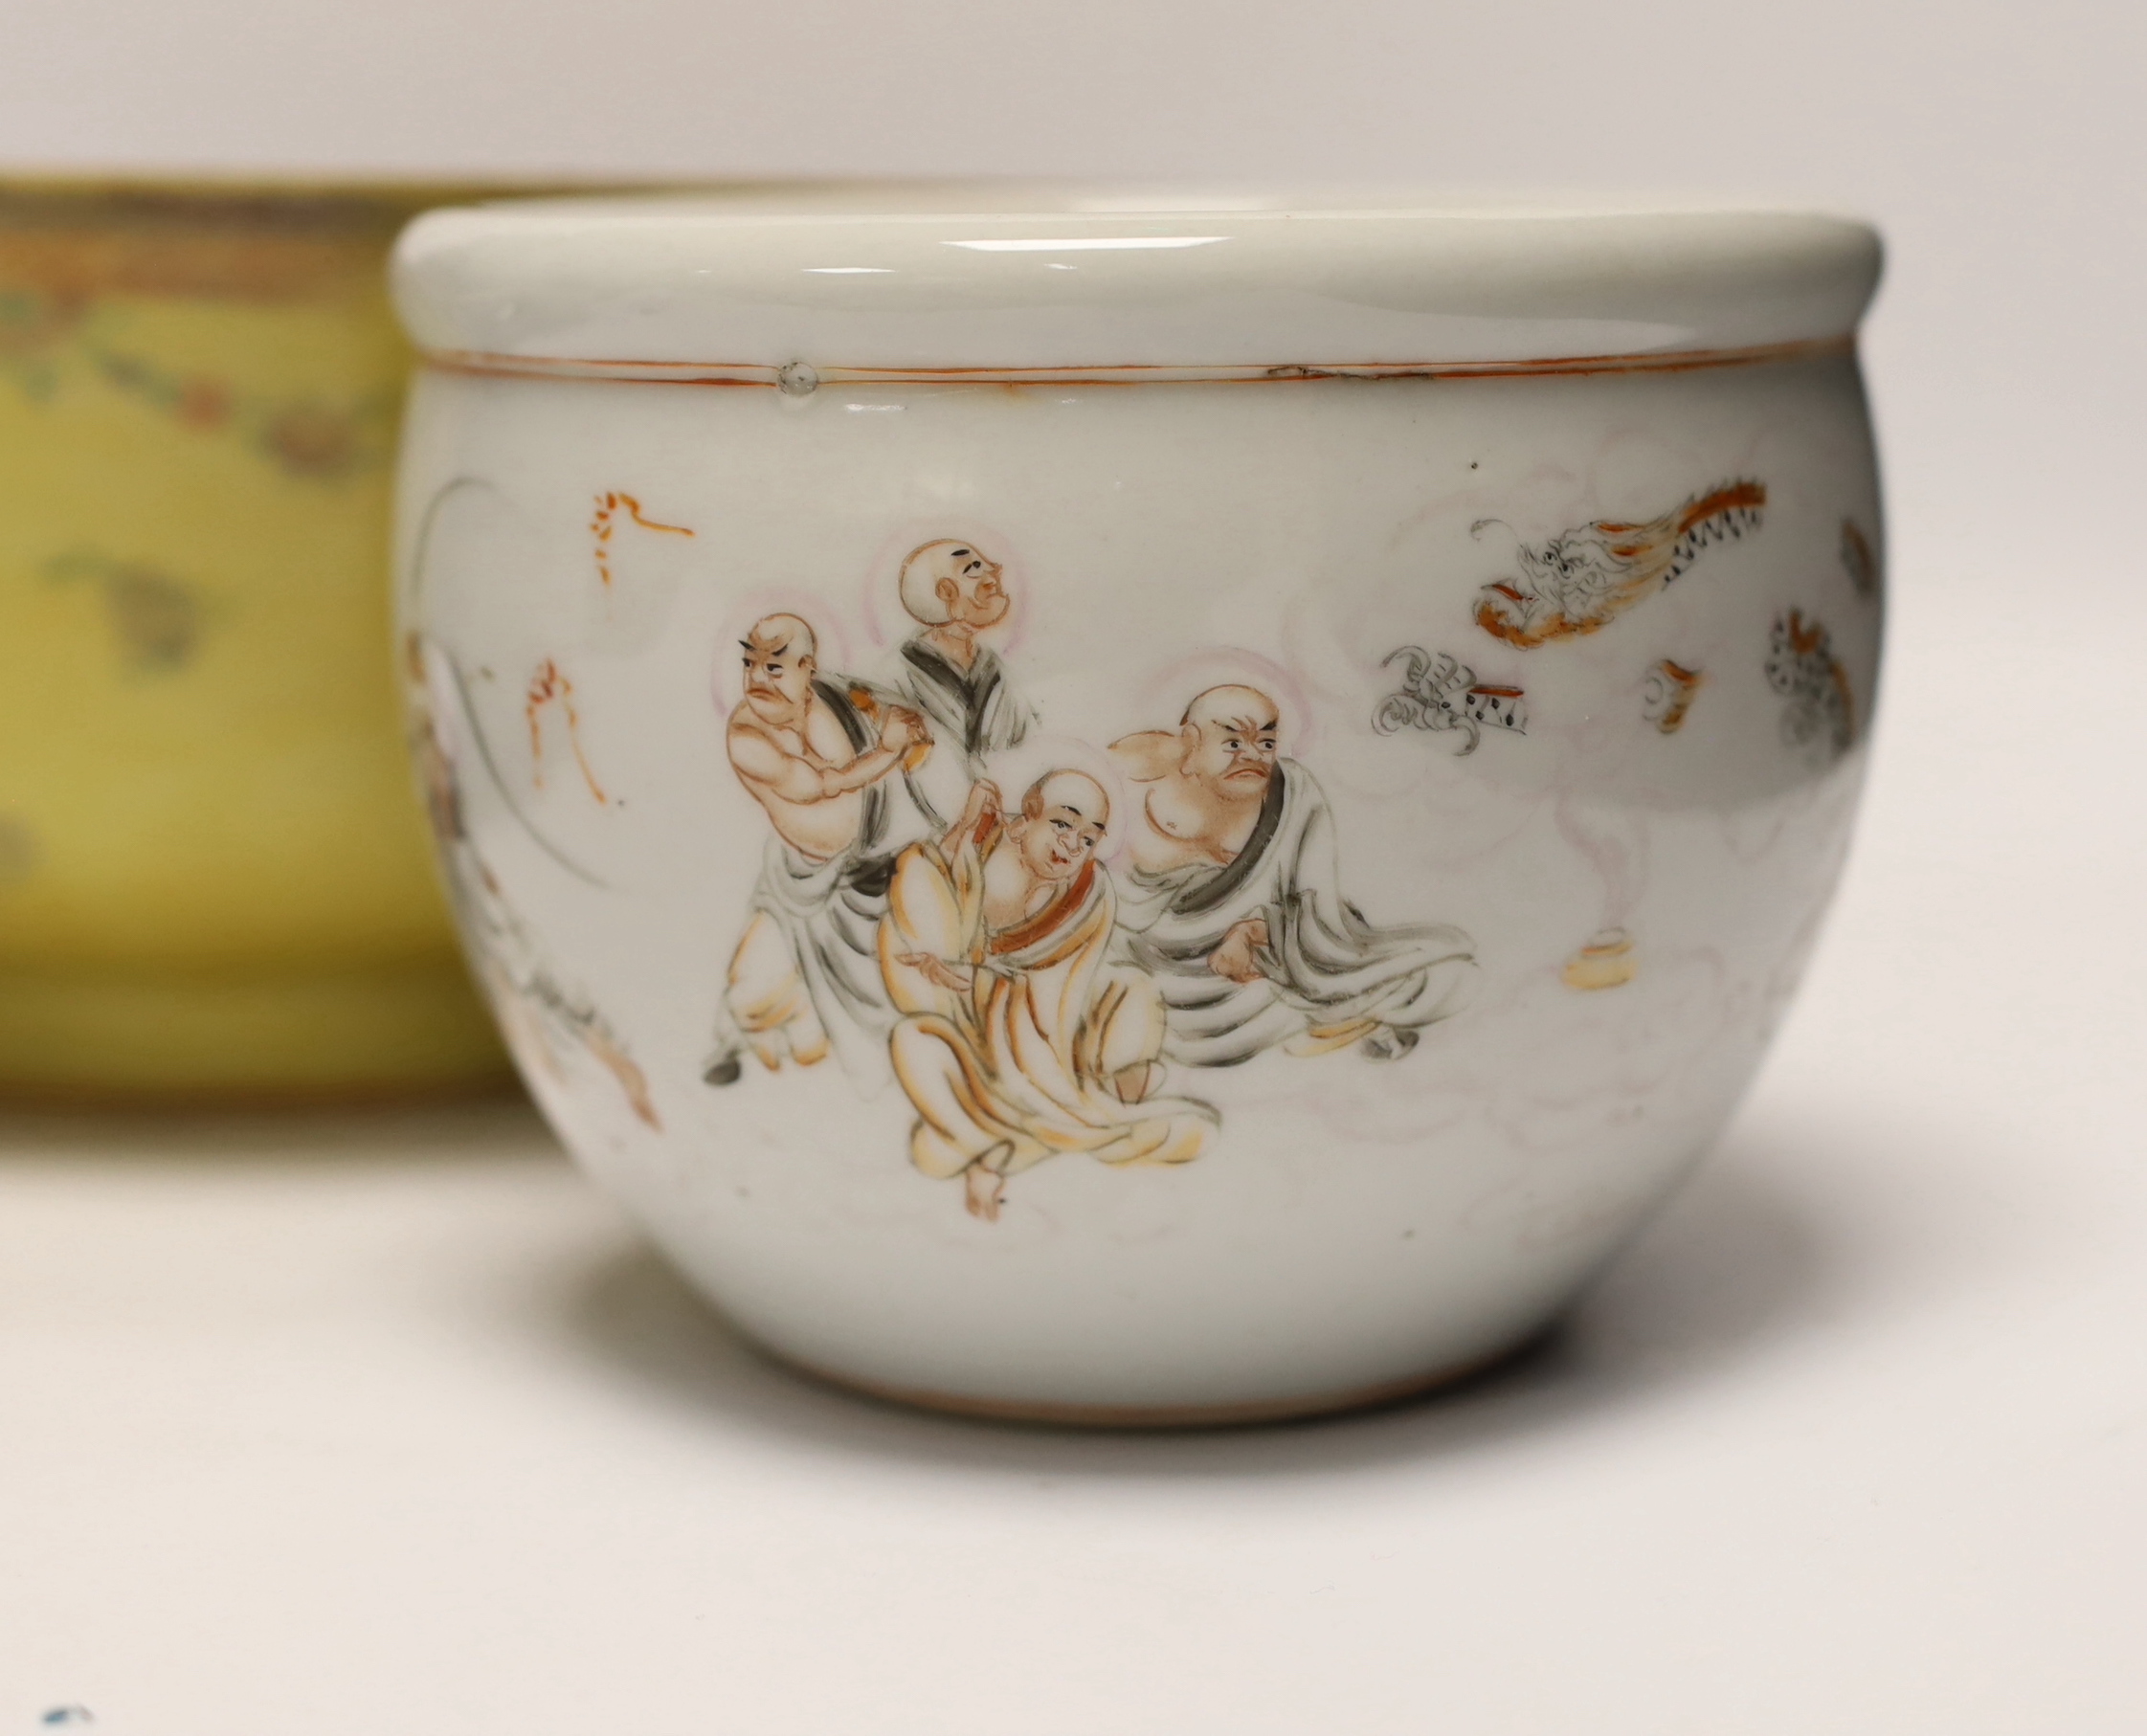 Two Chinese famille rose bowls and a small jardiniere